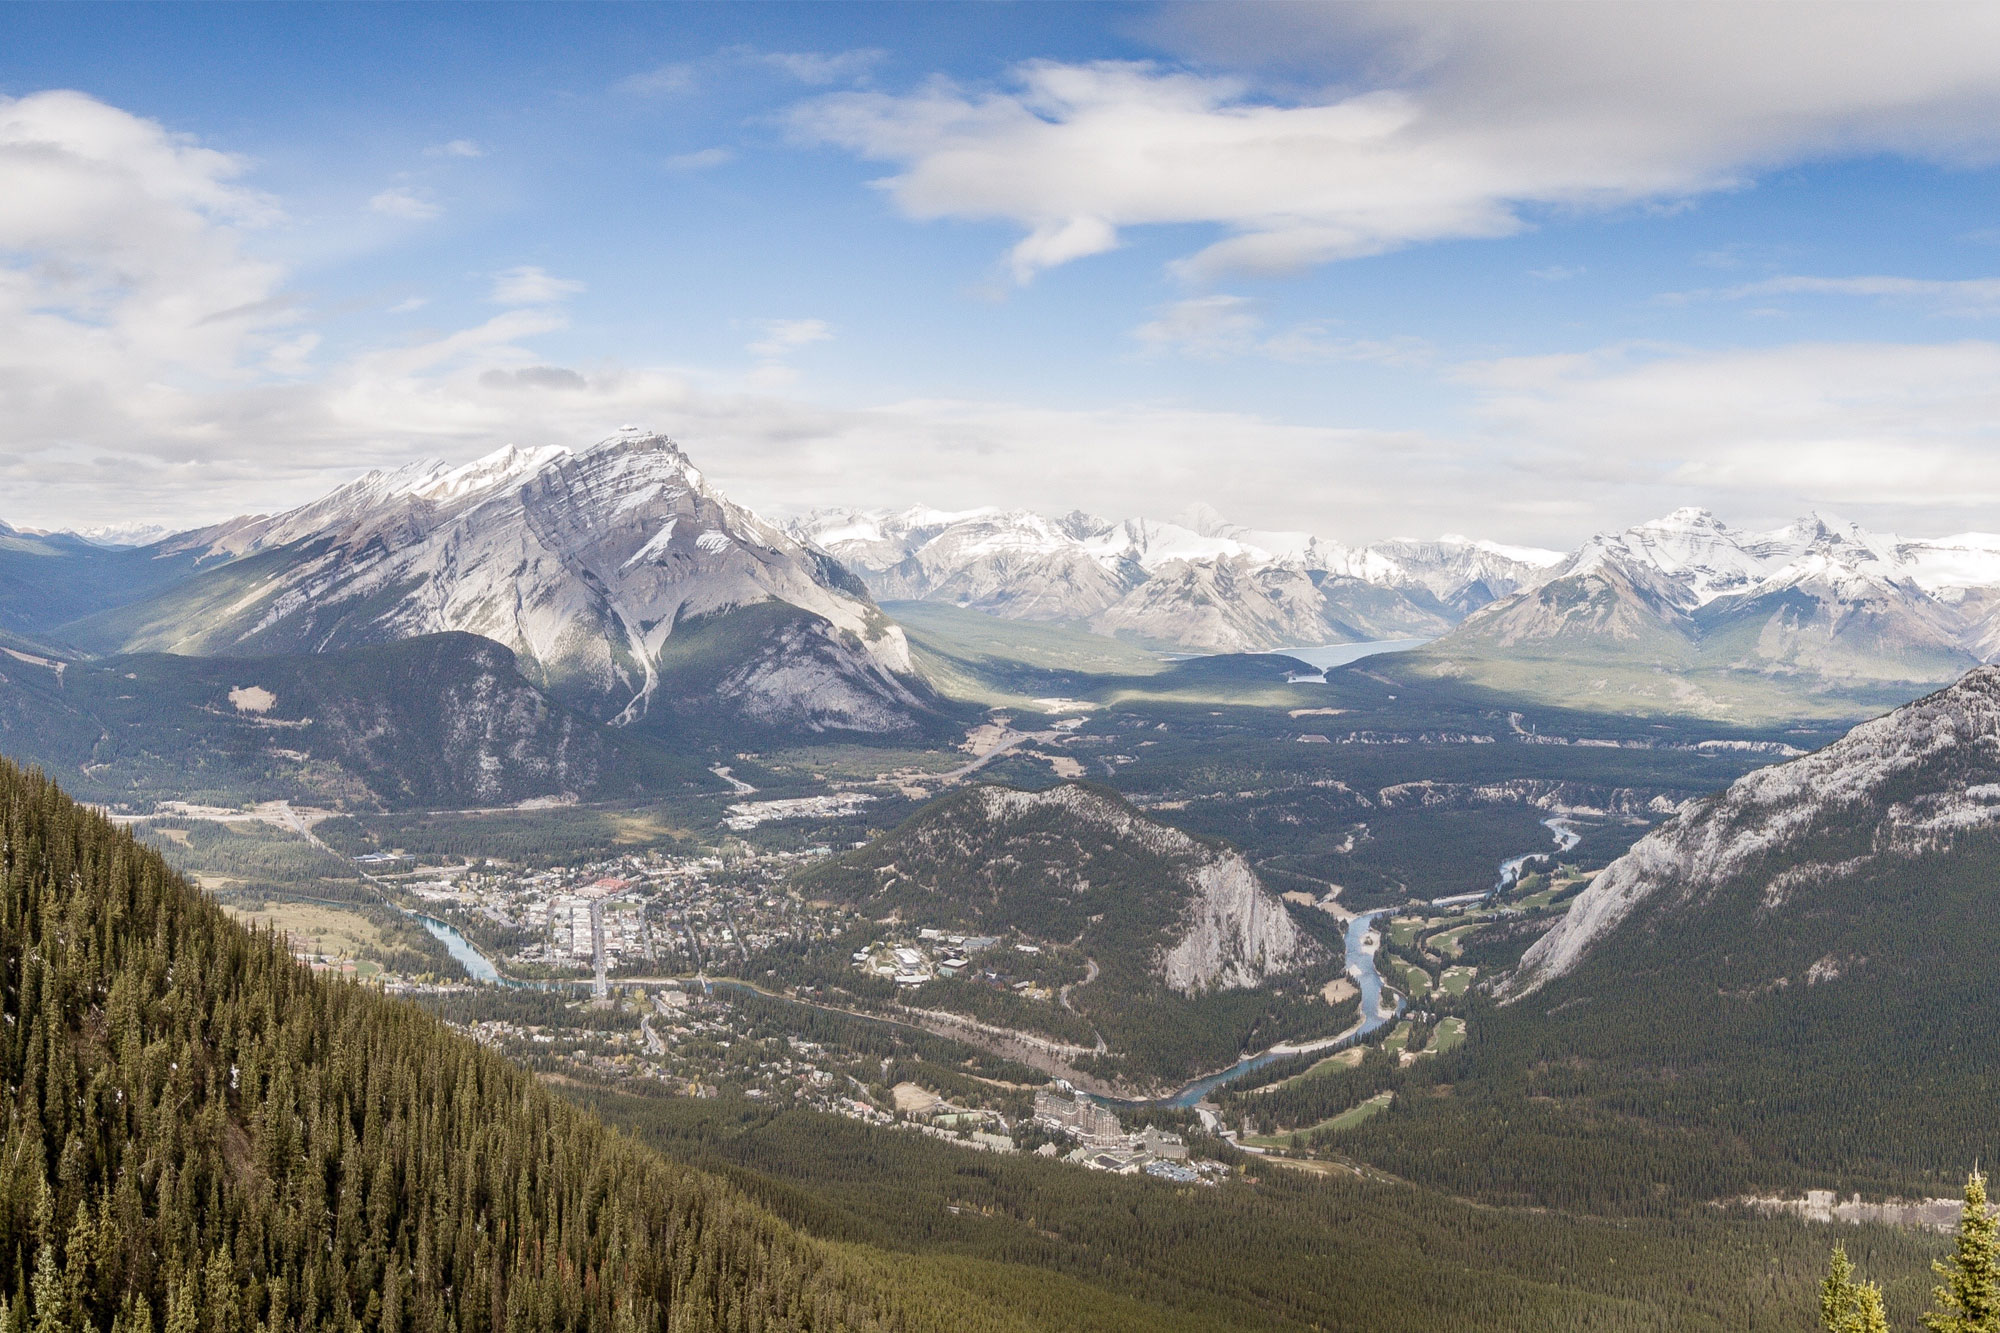 Top-of-Sulphur-Mountain is one of the top things to do in Banff all year round